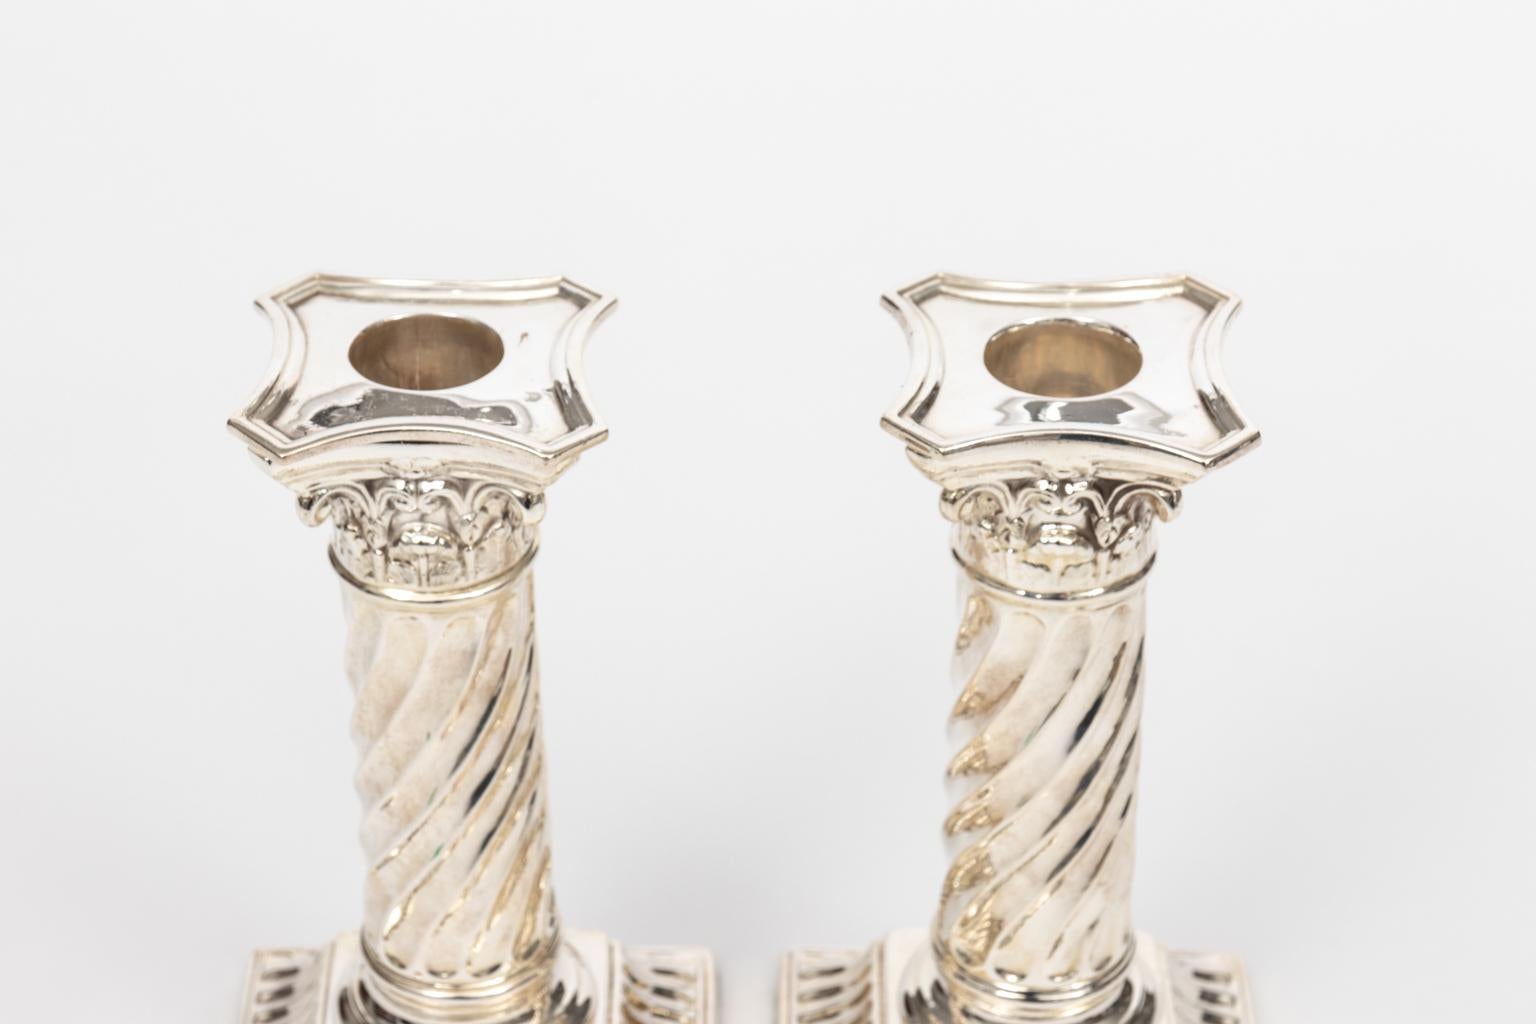 Pair of English silver plate classical Corinthian style column candlesticks, circa 1930s. Please note of wear consistent with age. Made in England.